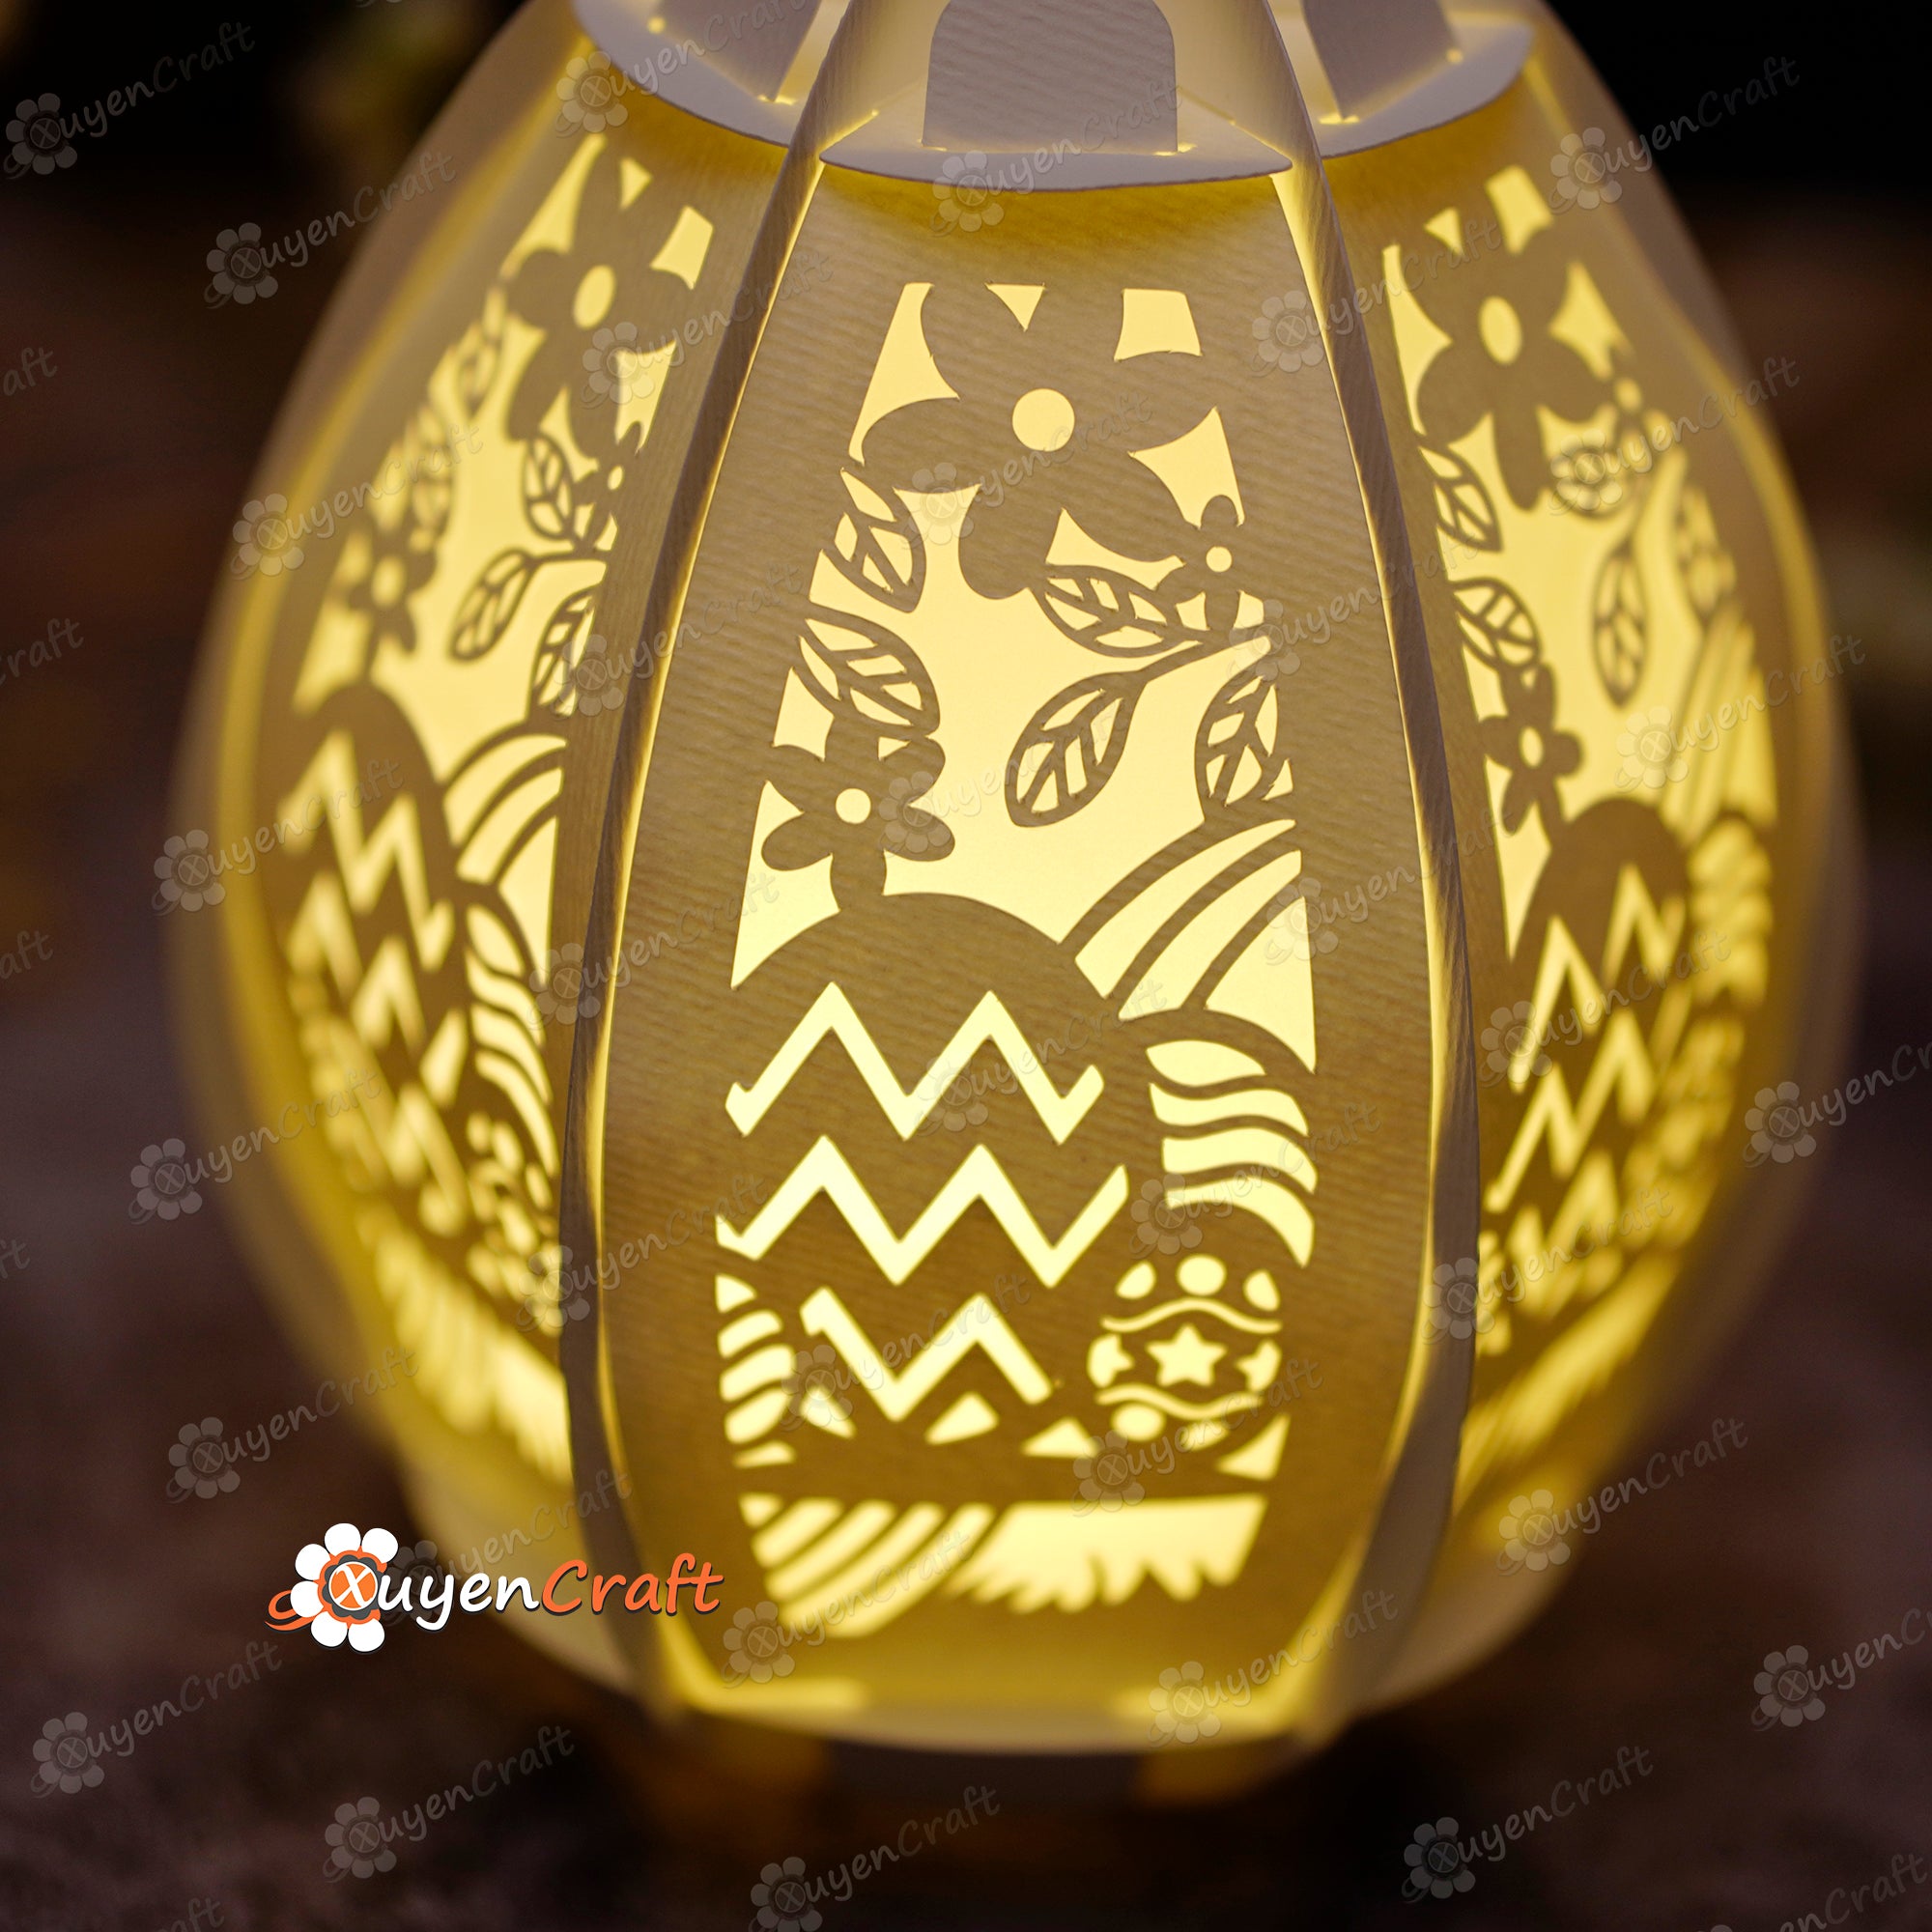 Combo 3 Easter Egg Lantern PDF, SVG Template for Cricut Project, ScanNcut, Cameo4